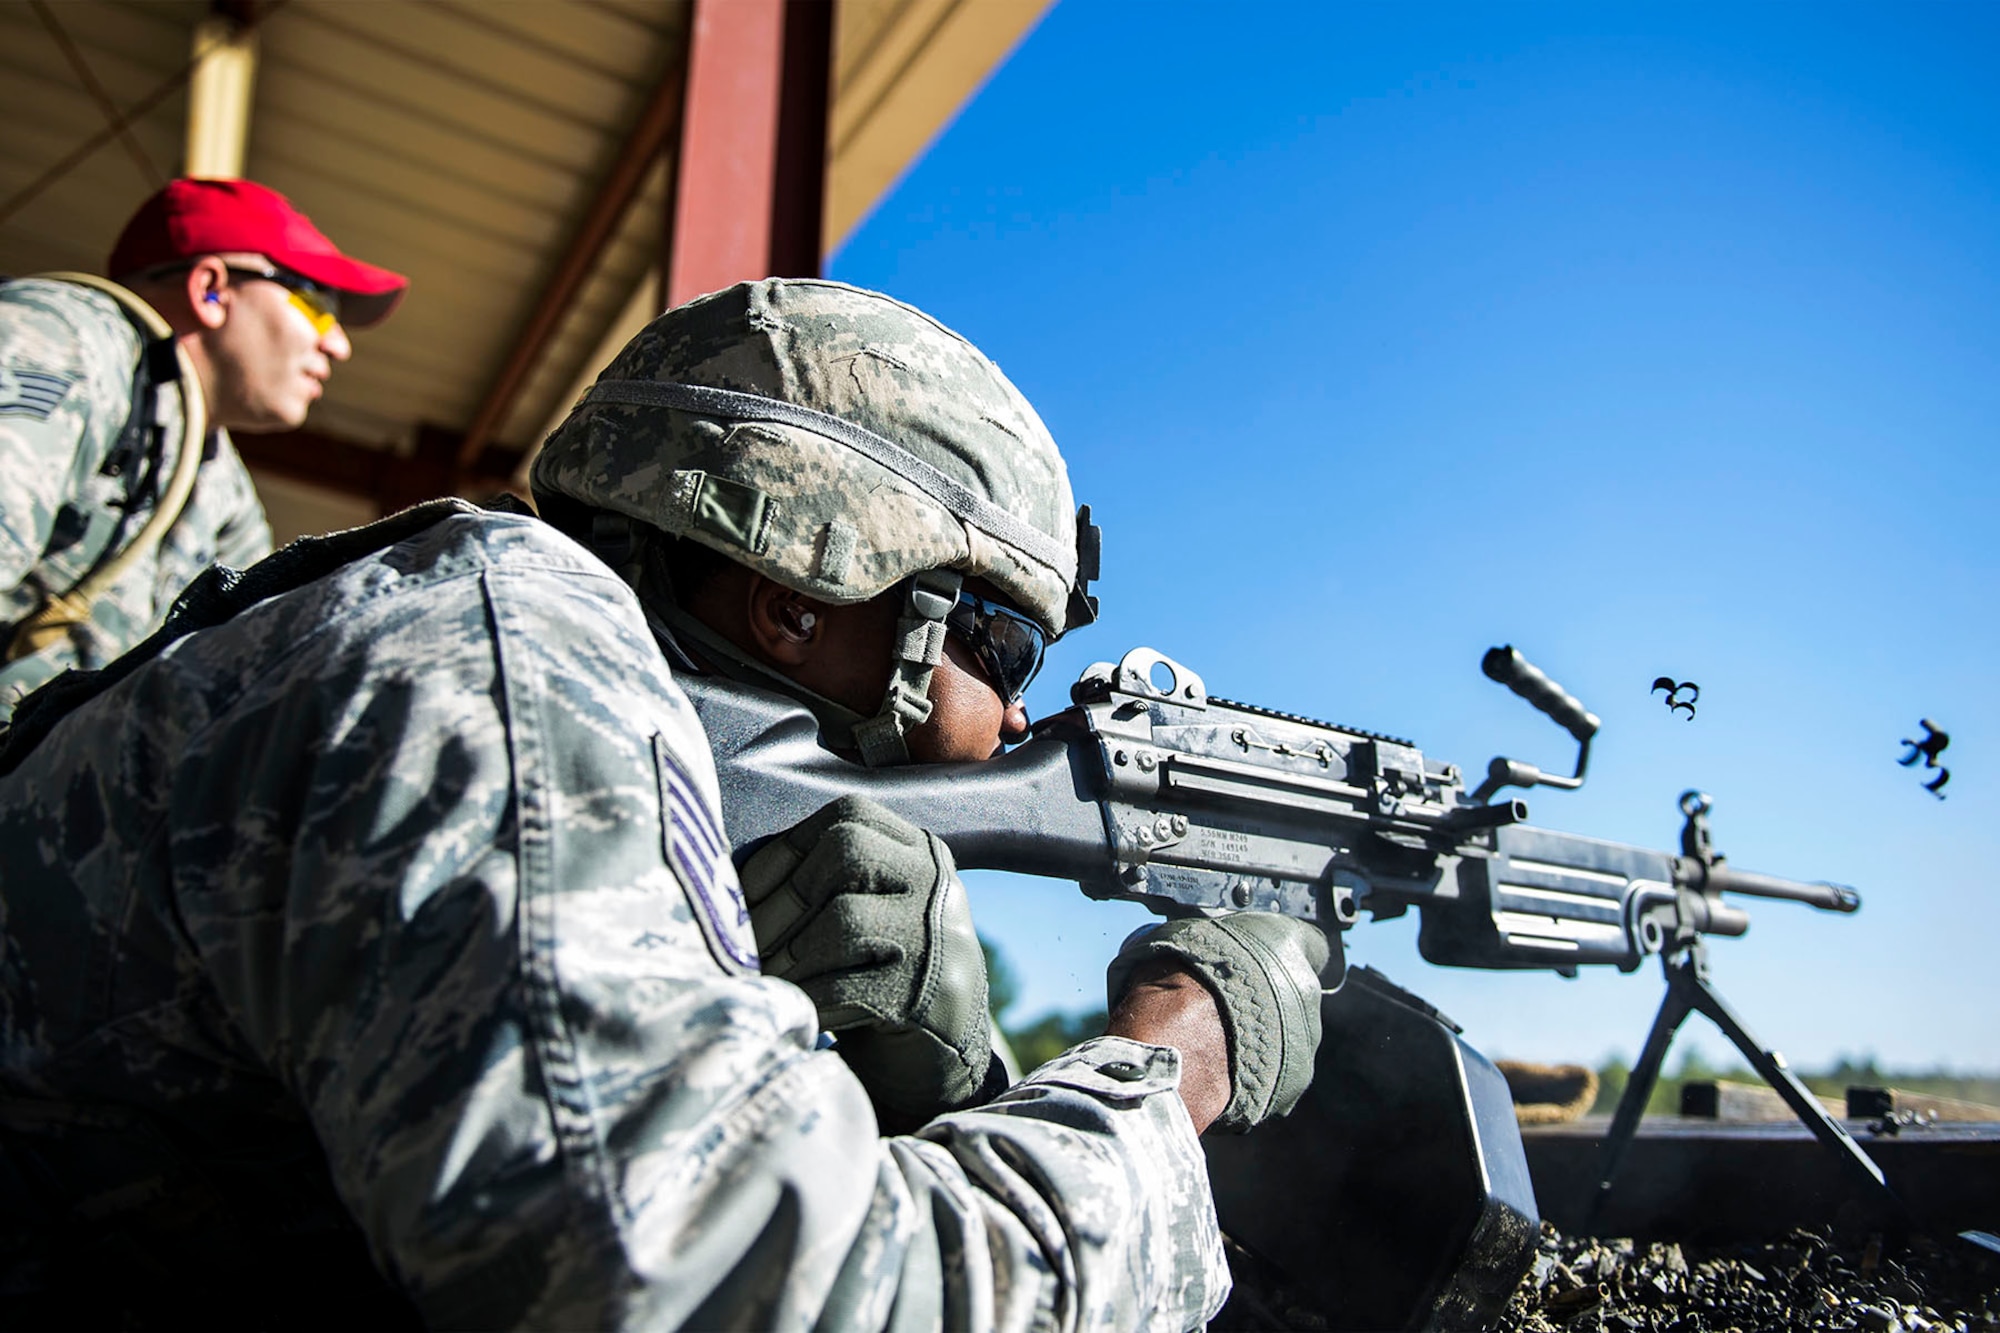 A U.S. Airman assigned to the 169th Security Forces Squadron at McEntire Joint National Guard Base, S.C., fires the M249 light machine gun in the prone position during heavy weapons training at Fort Jackson, S.C., Oct. 5, 2014. Routine weapons training ensures Airmen of the South Carolina Air National Guard are trained and prepared to perform their mission at home and abroad.   (U.S. Air National Guard photo by Tech. Sgt. Jorge Intriago/Released)